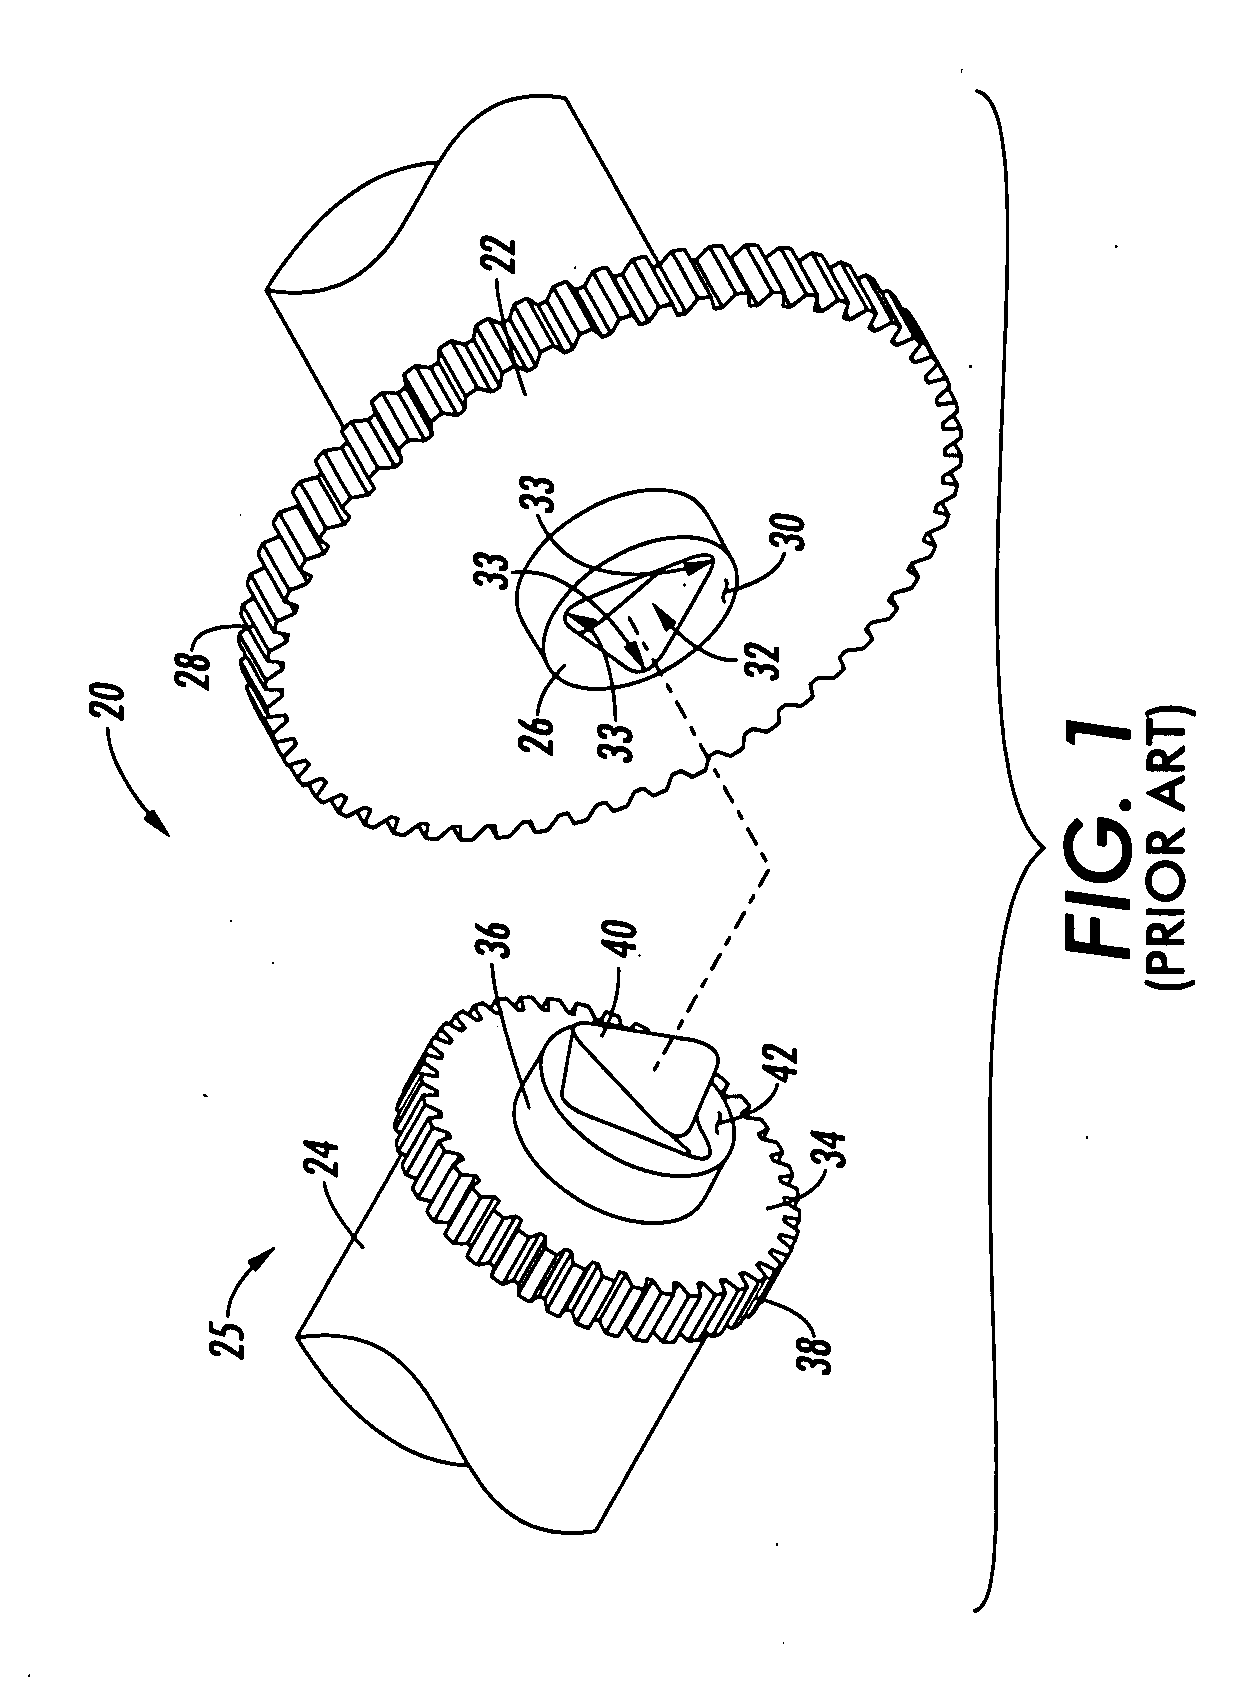 Coupling mechanism for material supply module